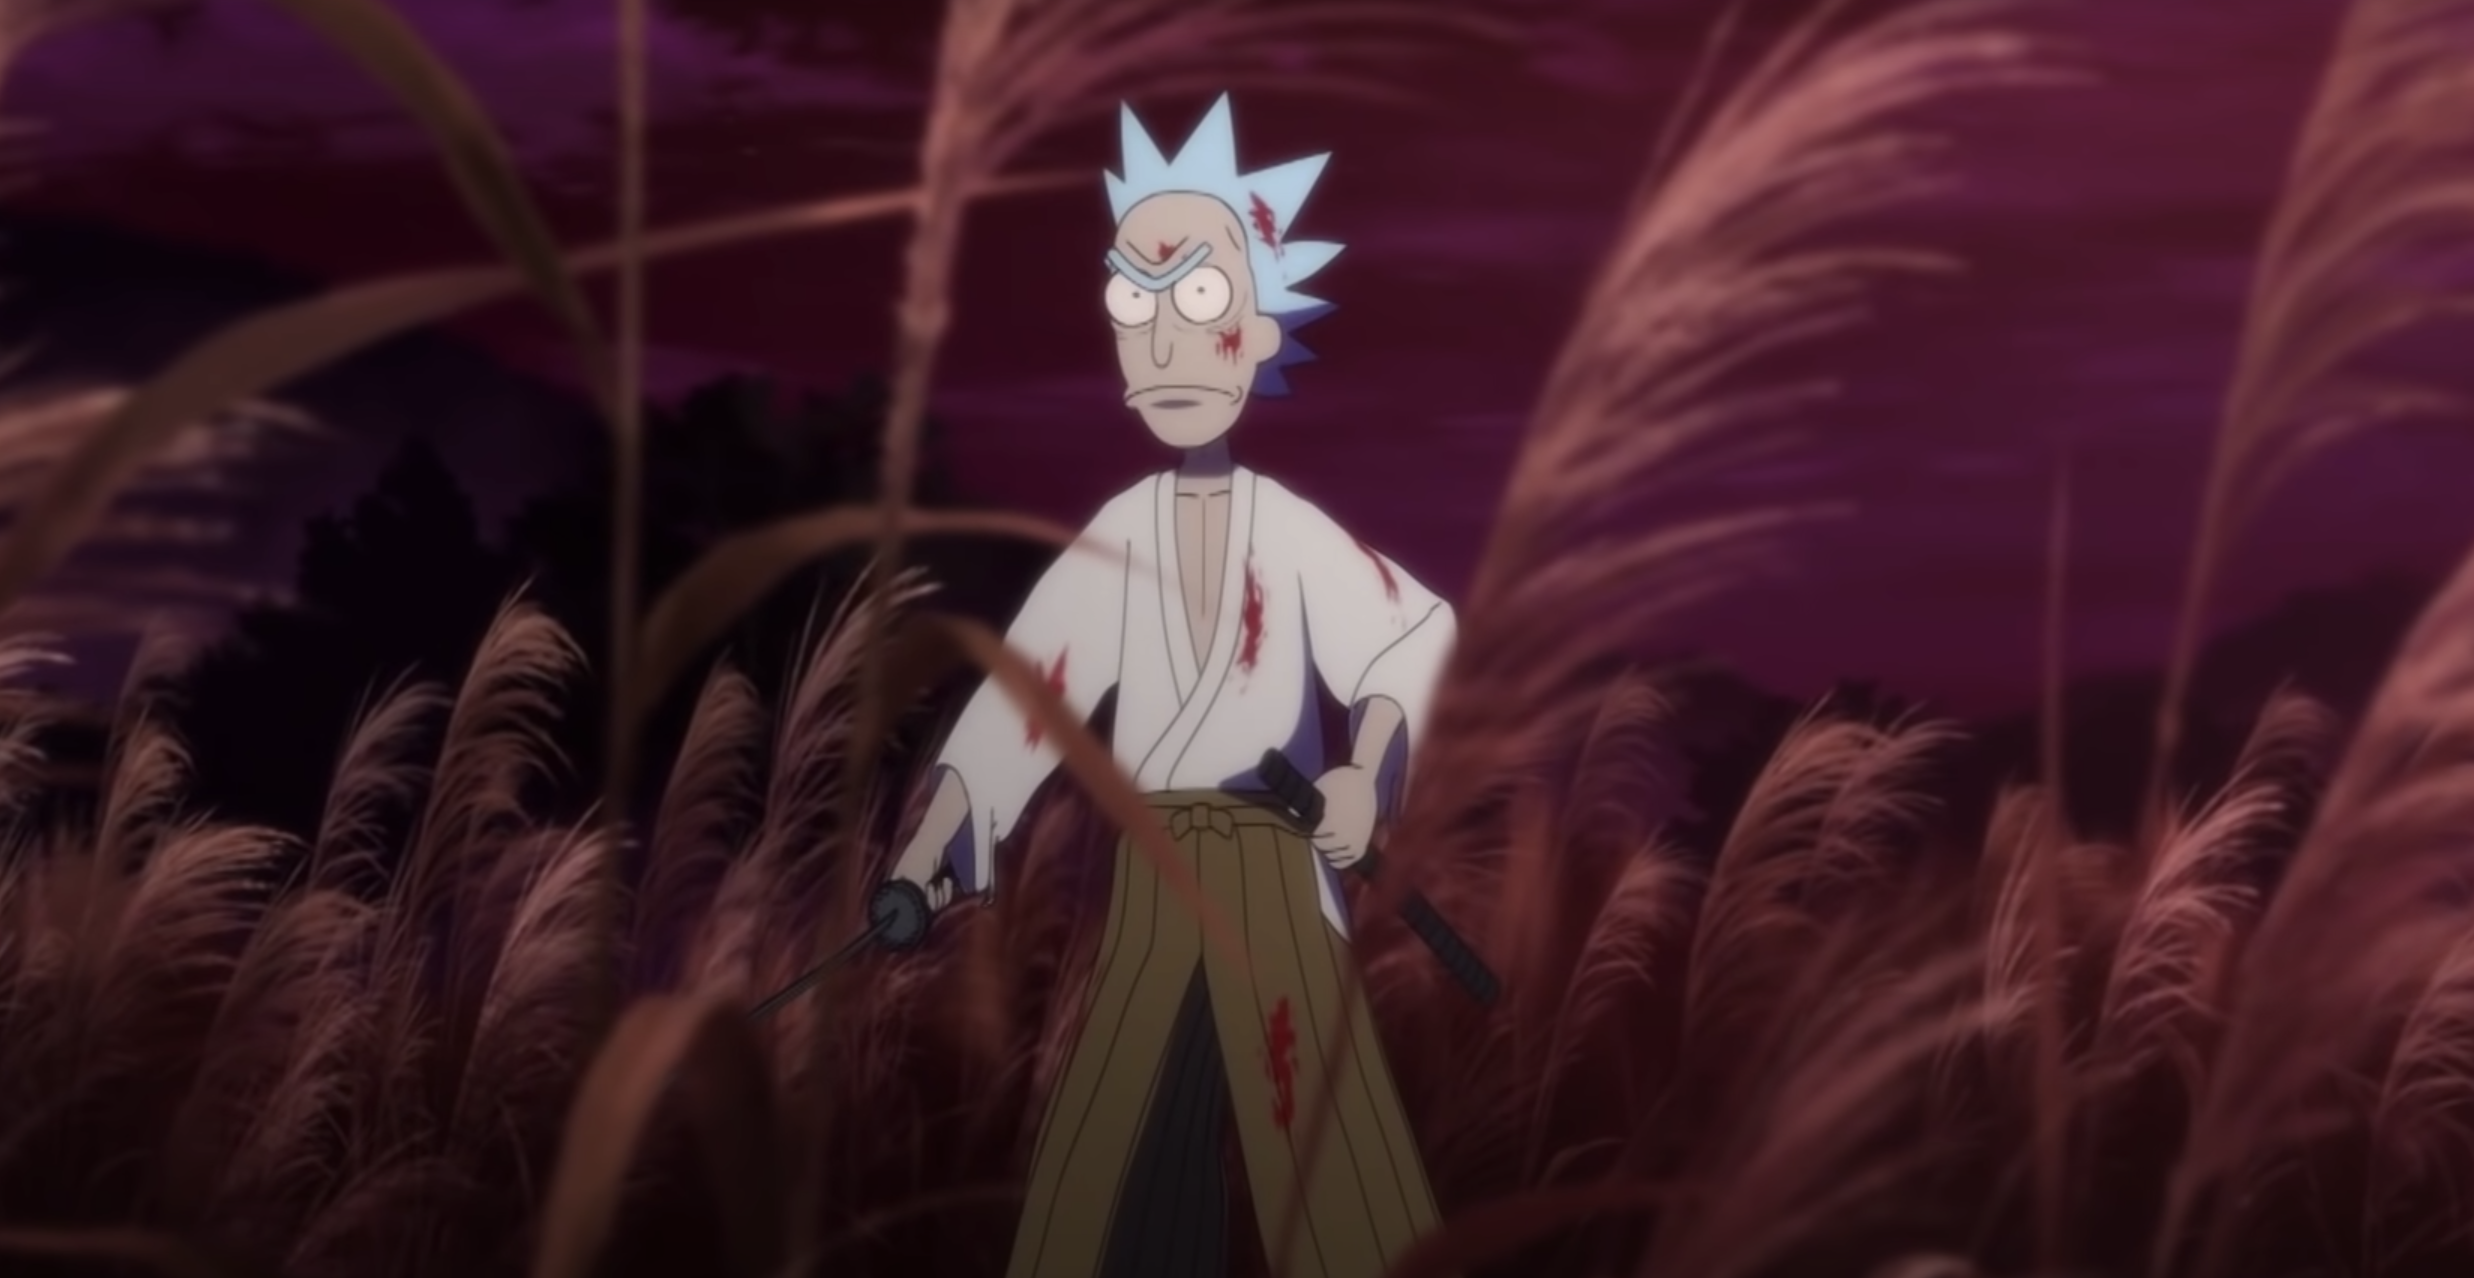 The Rick and Morty Anime trailer is out! Here is a complete breakdown